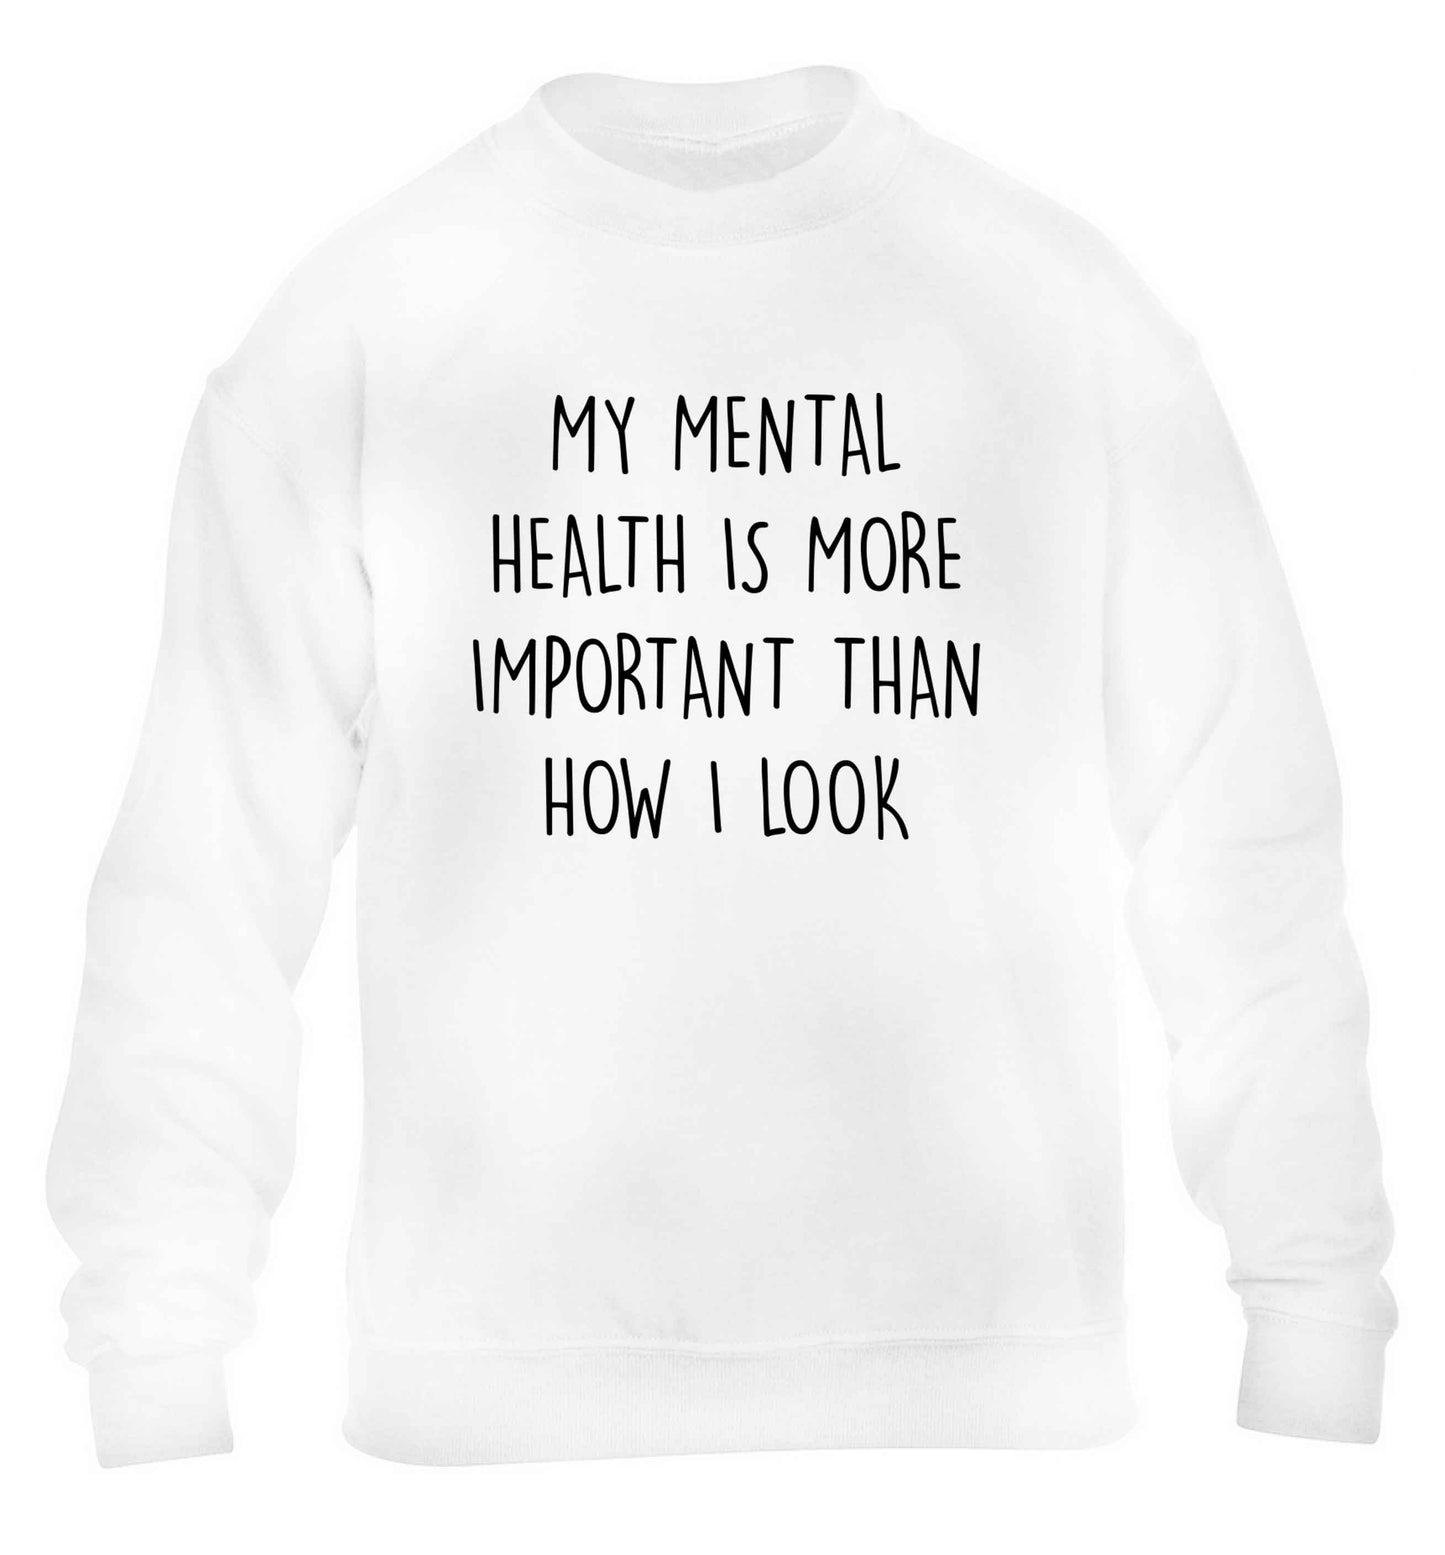 My mental health is more importnat than how I look children's white sweater 12-13 Years